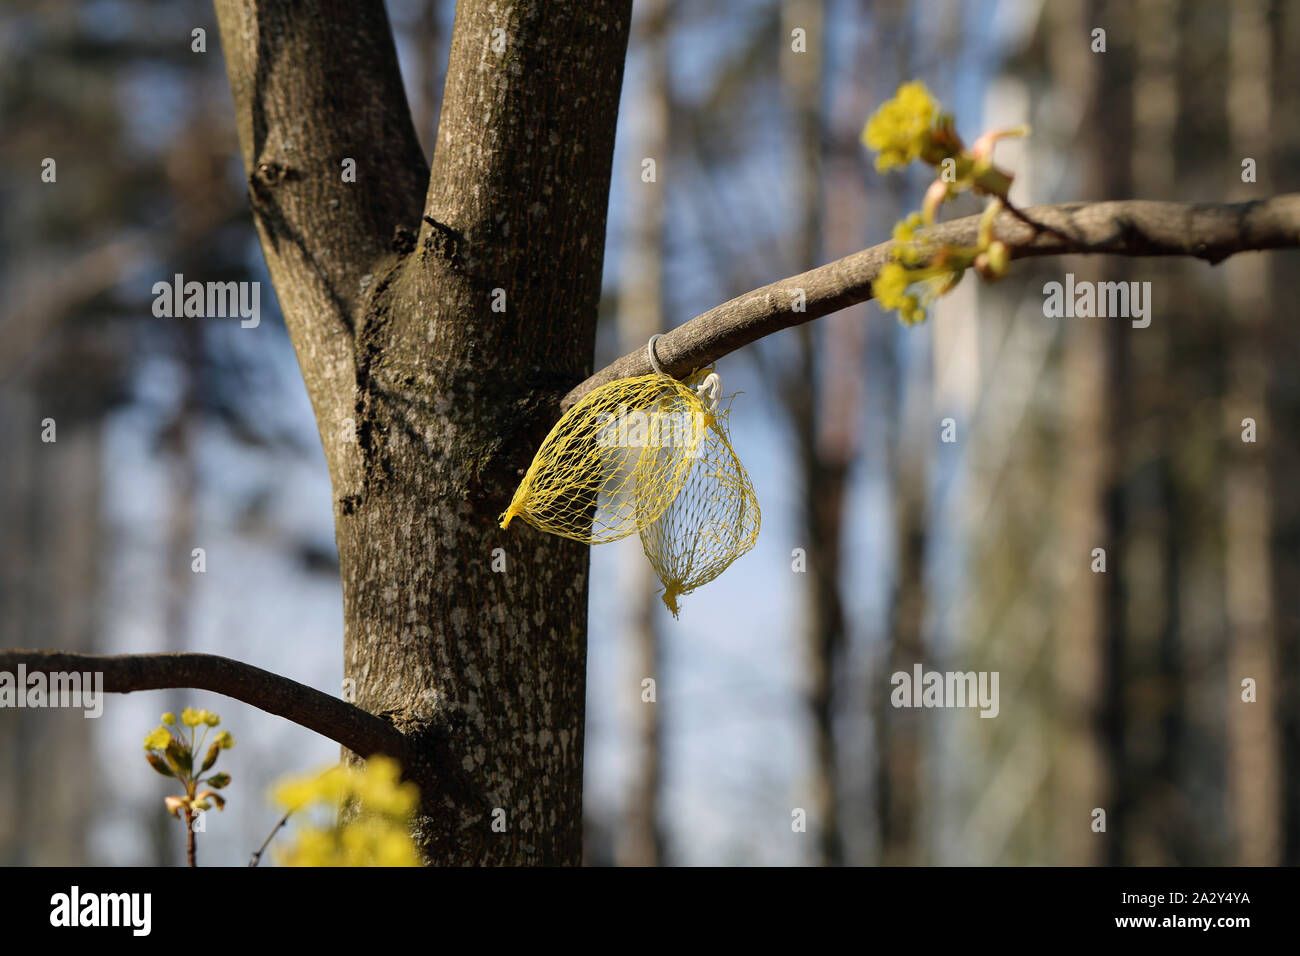 Empty bird feeding balls hanging from a tree branch. No birds or people. Eaten bird food ball covers photographed in a forest located in Finland. Stock Photo